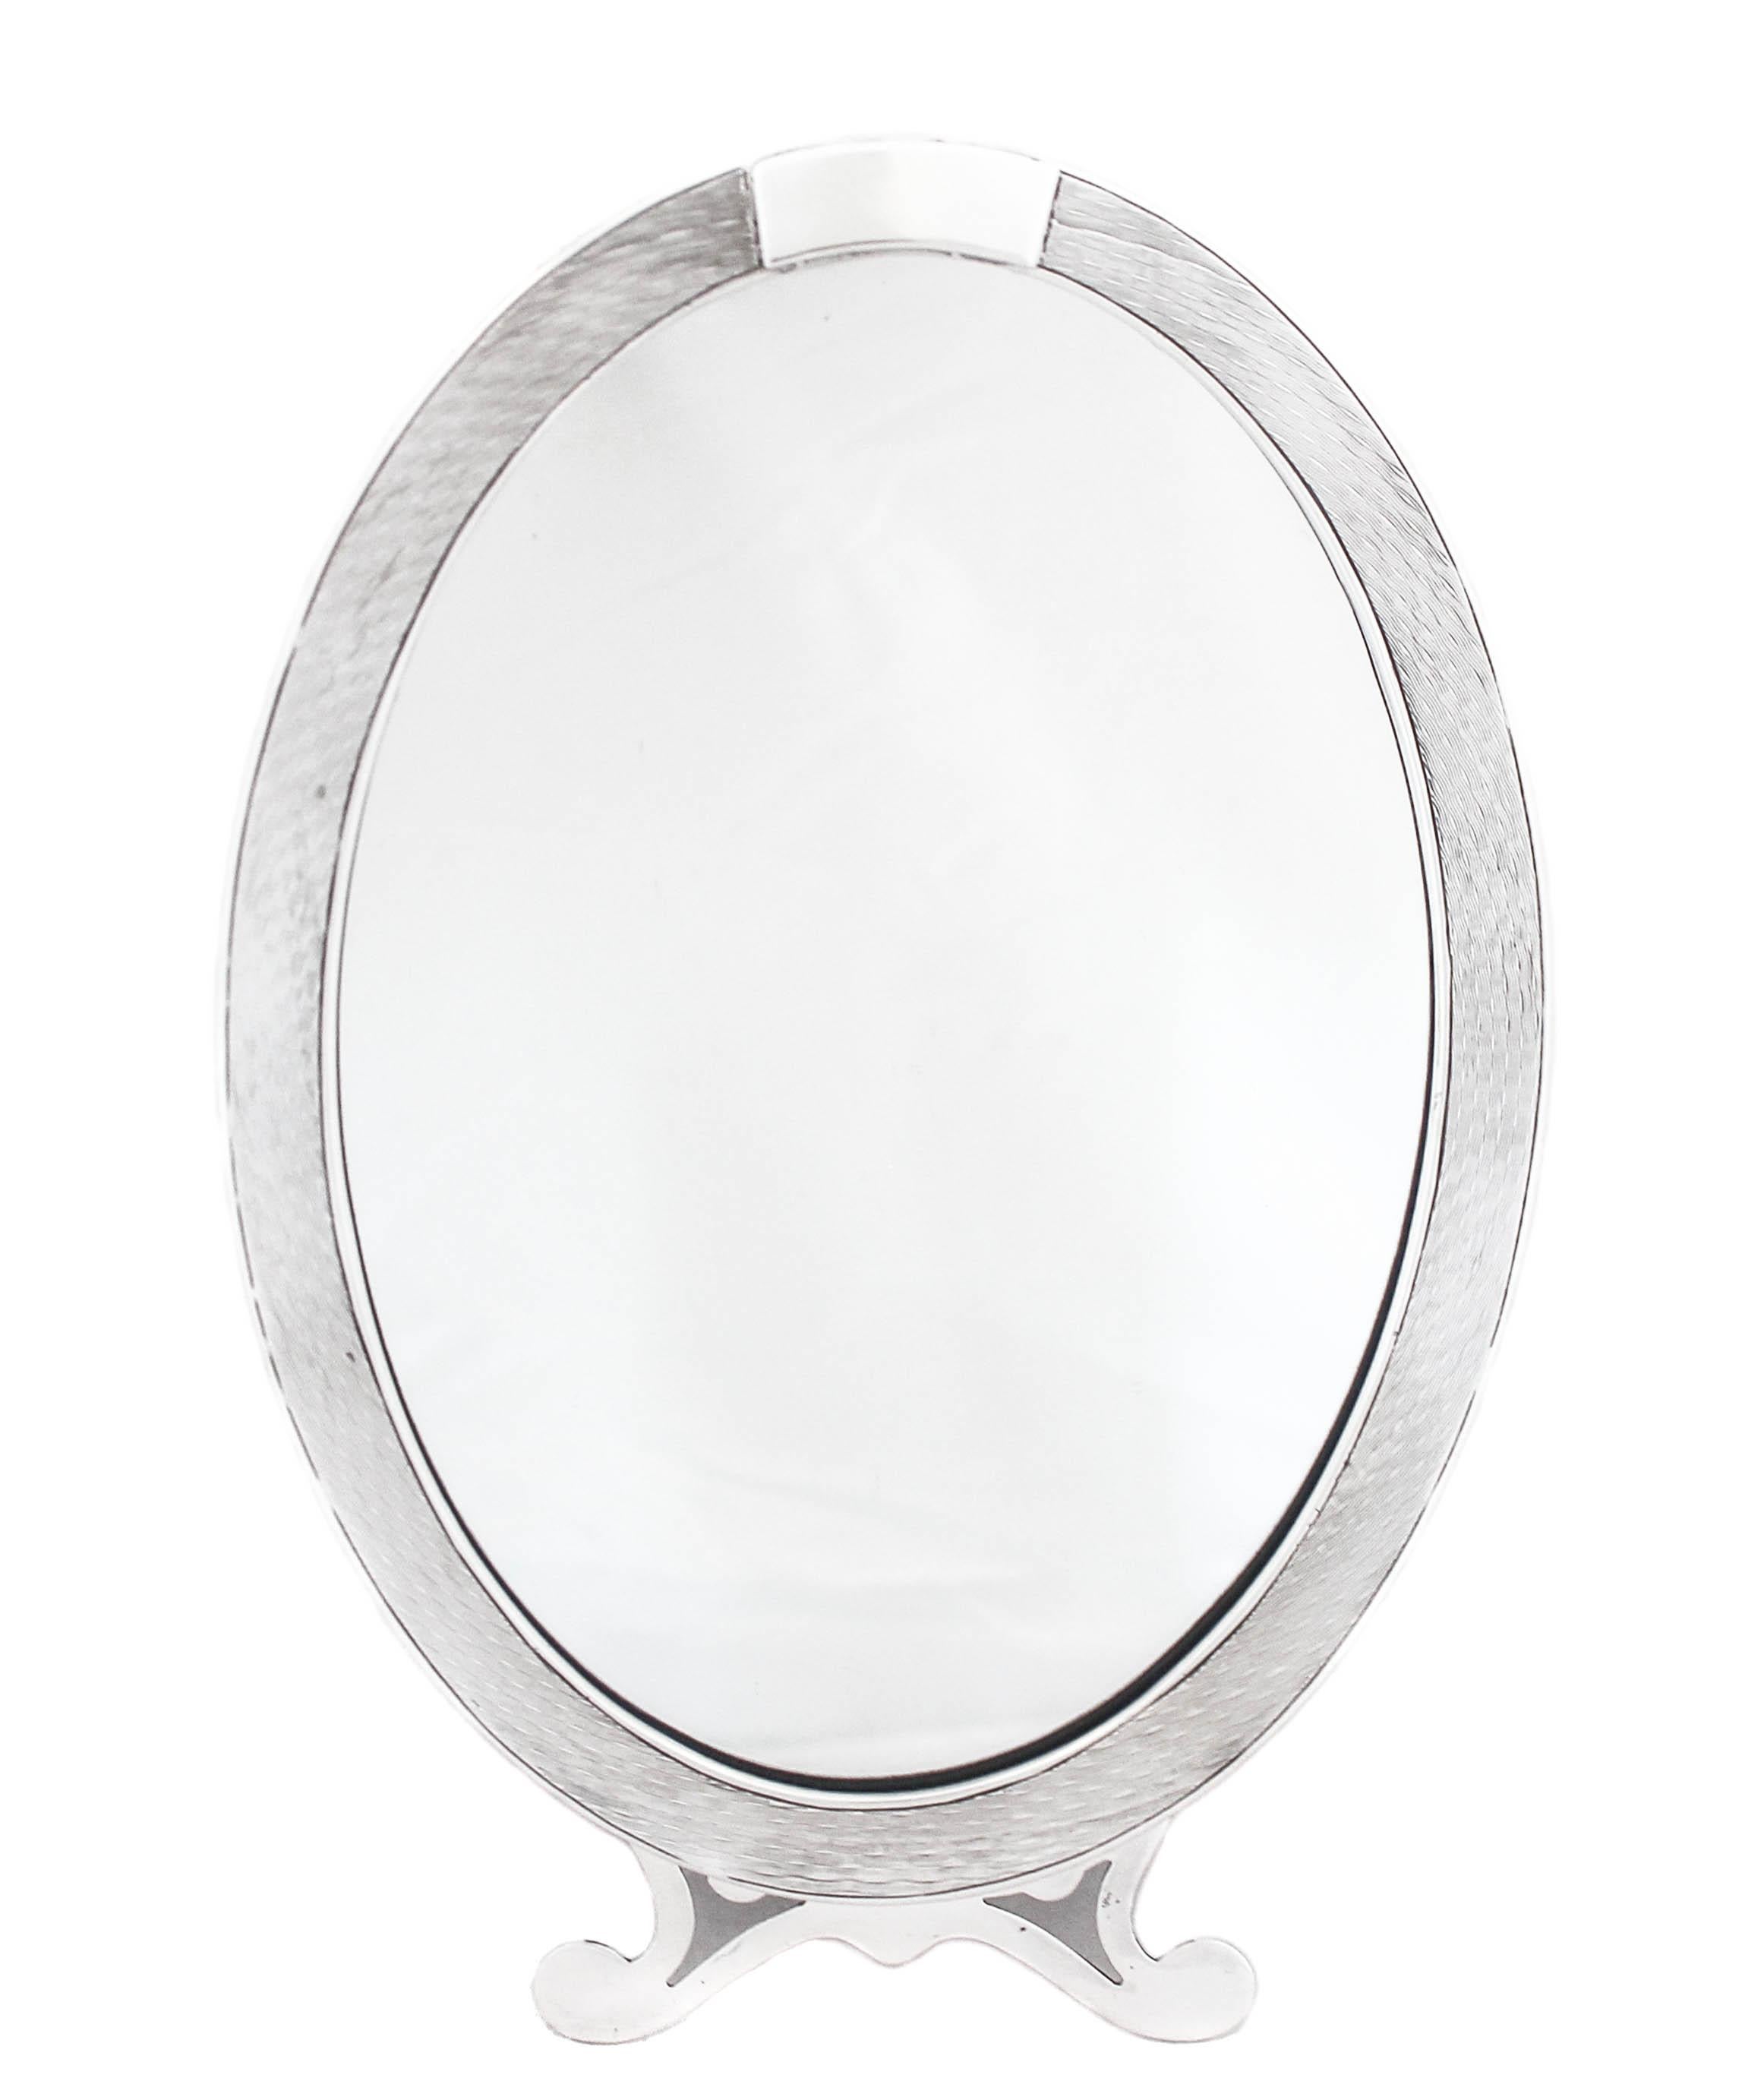 Being offered is a sterling silver vanity mirror from the early 20th century. Manufactured by the I. N. Deitsch silver company of New York. It has an engine-turned design on both sides with a space on top for a monogram. The bottom has Art Deco feet